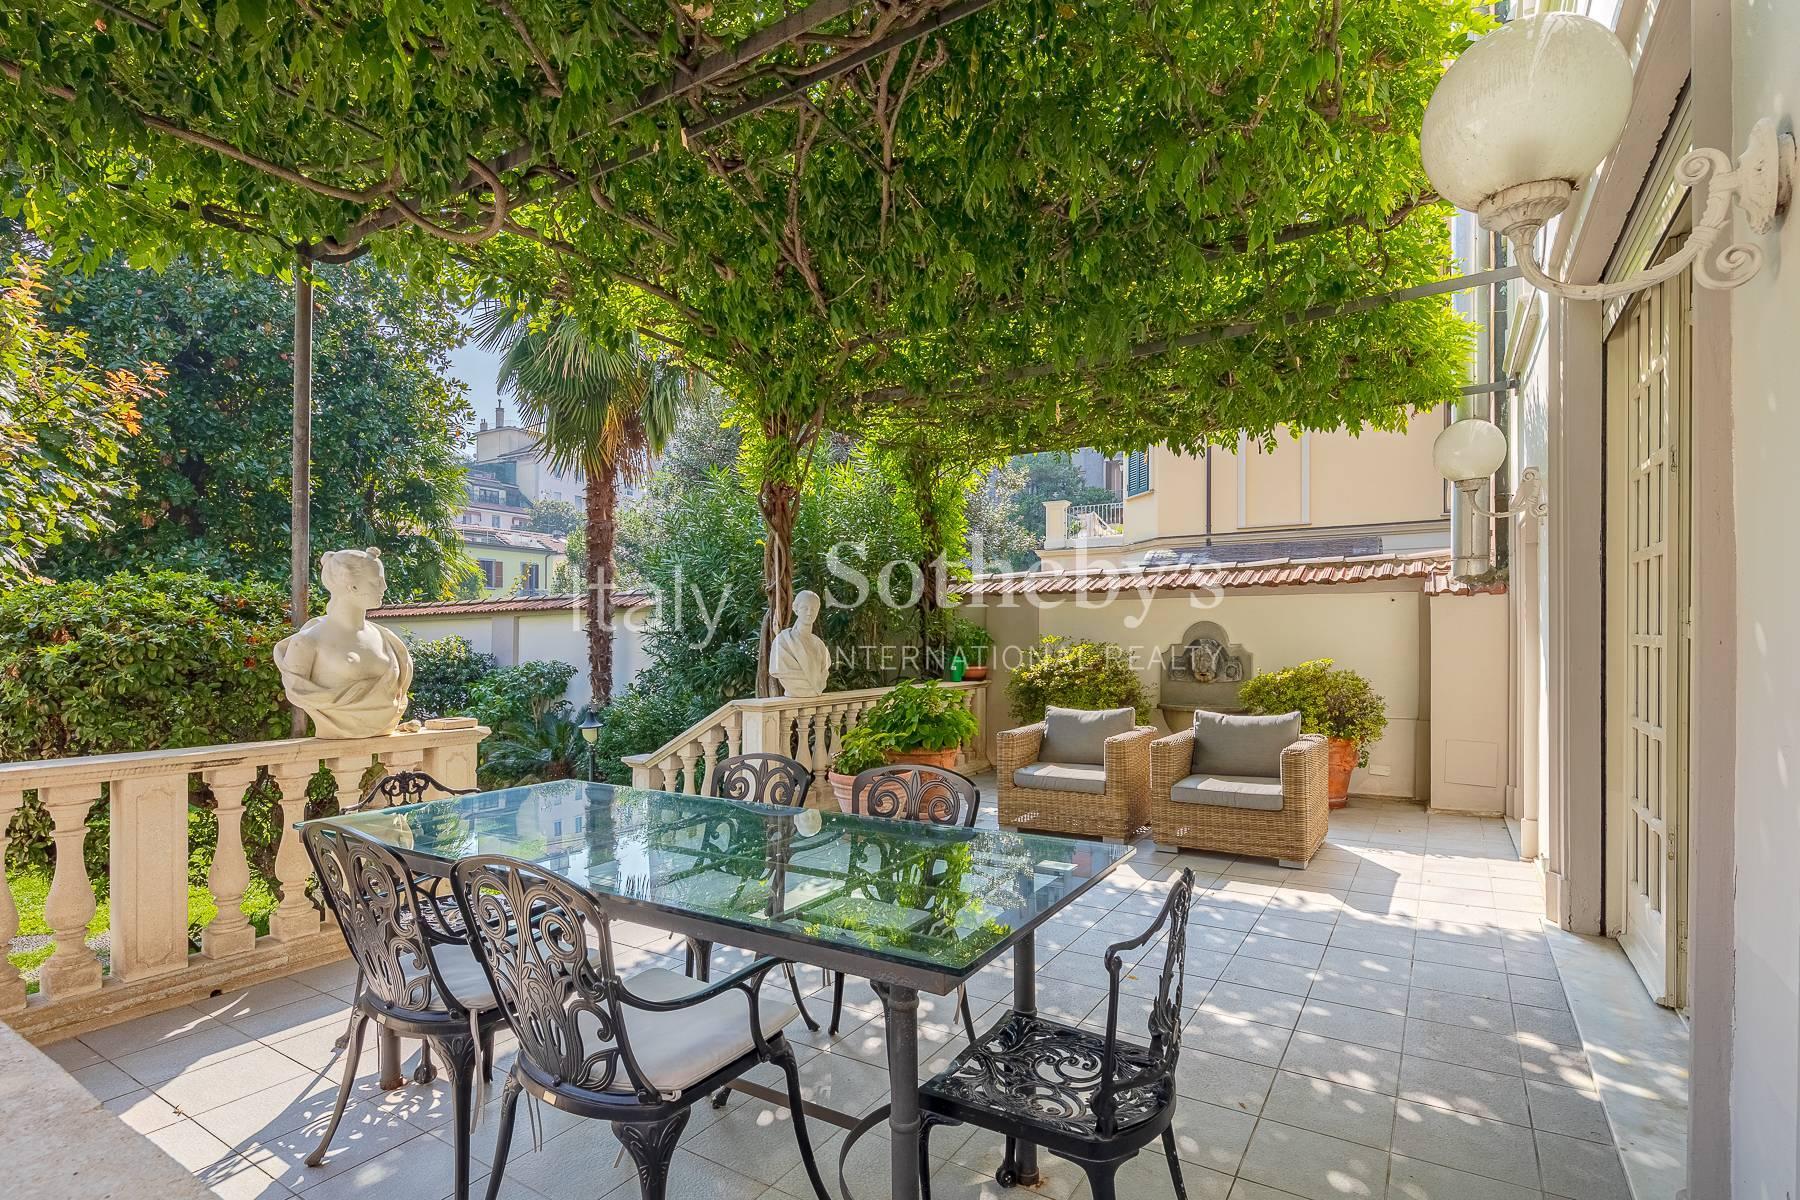 Exclusive Liberty style villa with private garden - 2